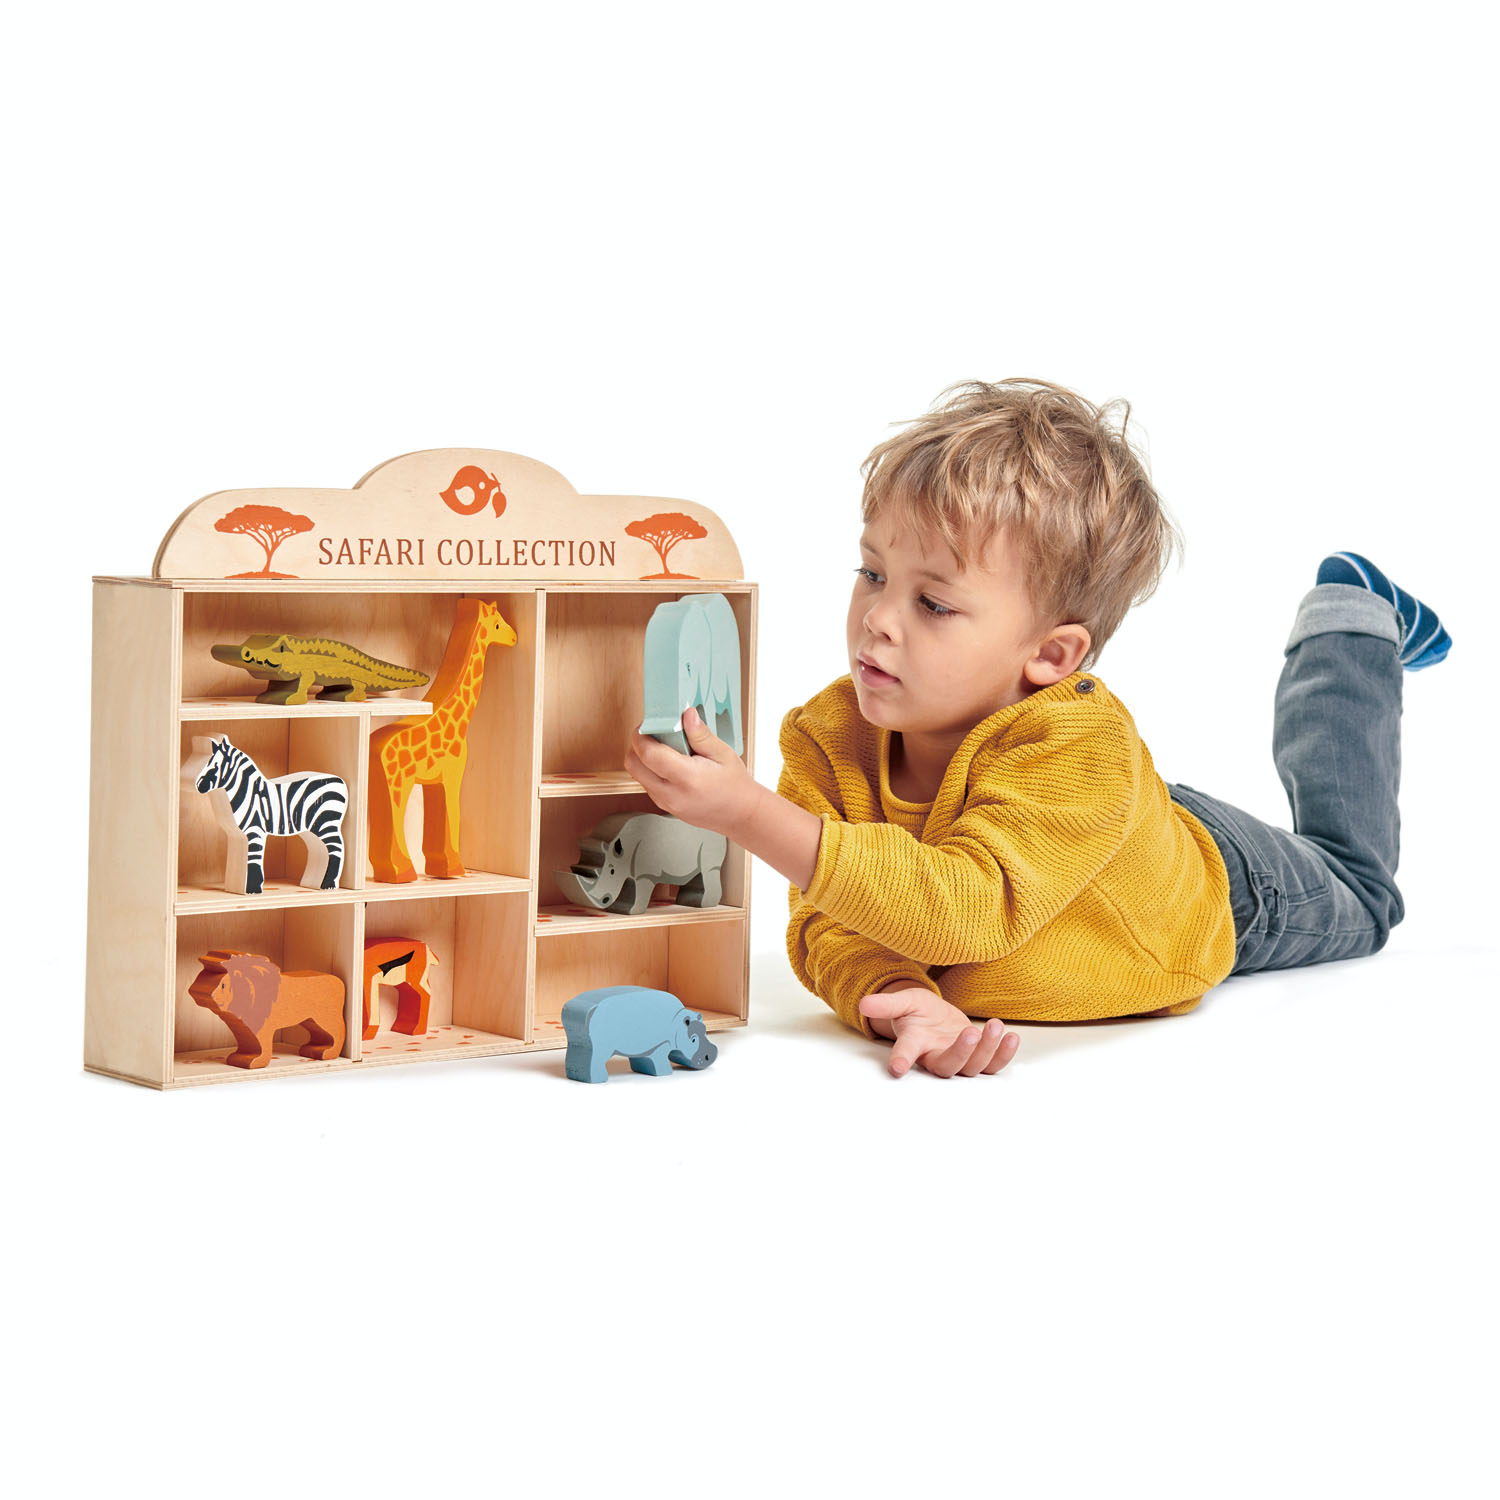 Tender Leaf 8 Safari Animals & Shelf Set | Hand-Crafted Wooden Animal Toys | Boy Playing |BeoVERDE.ie